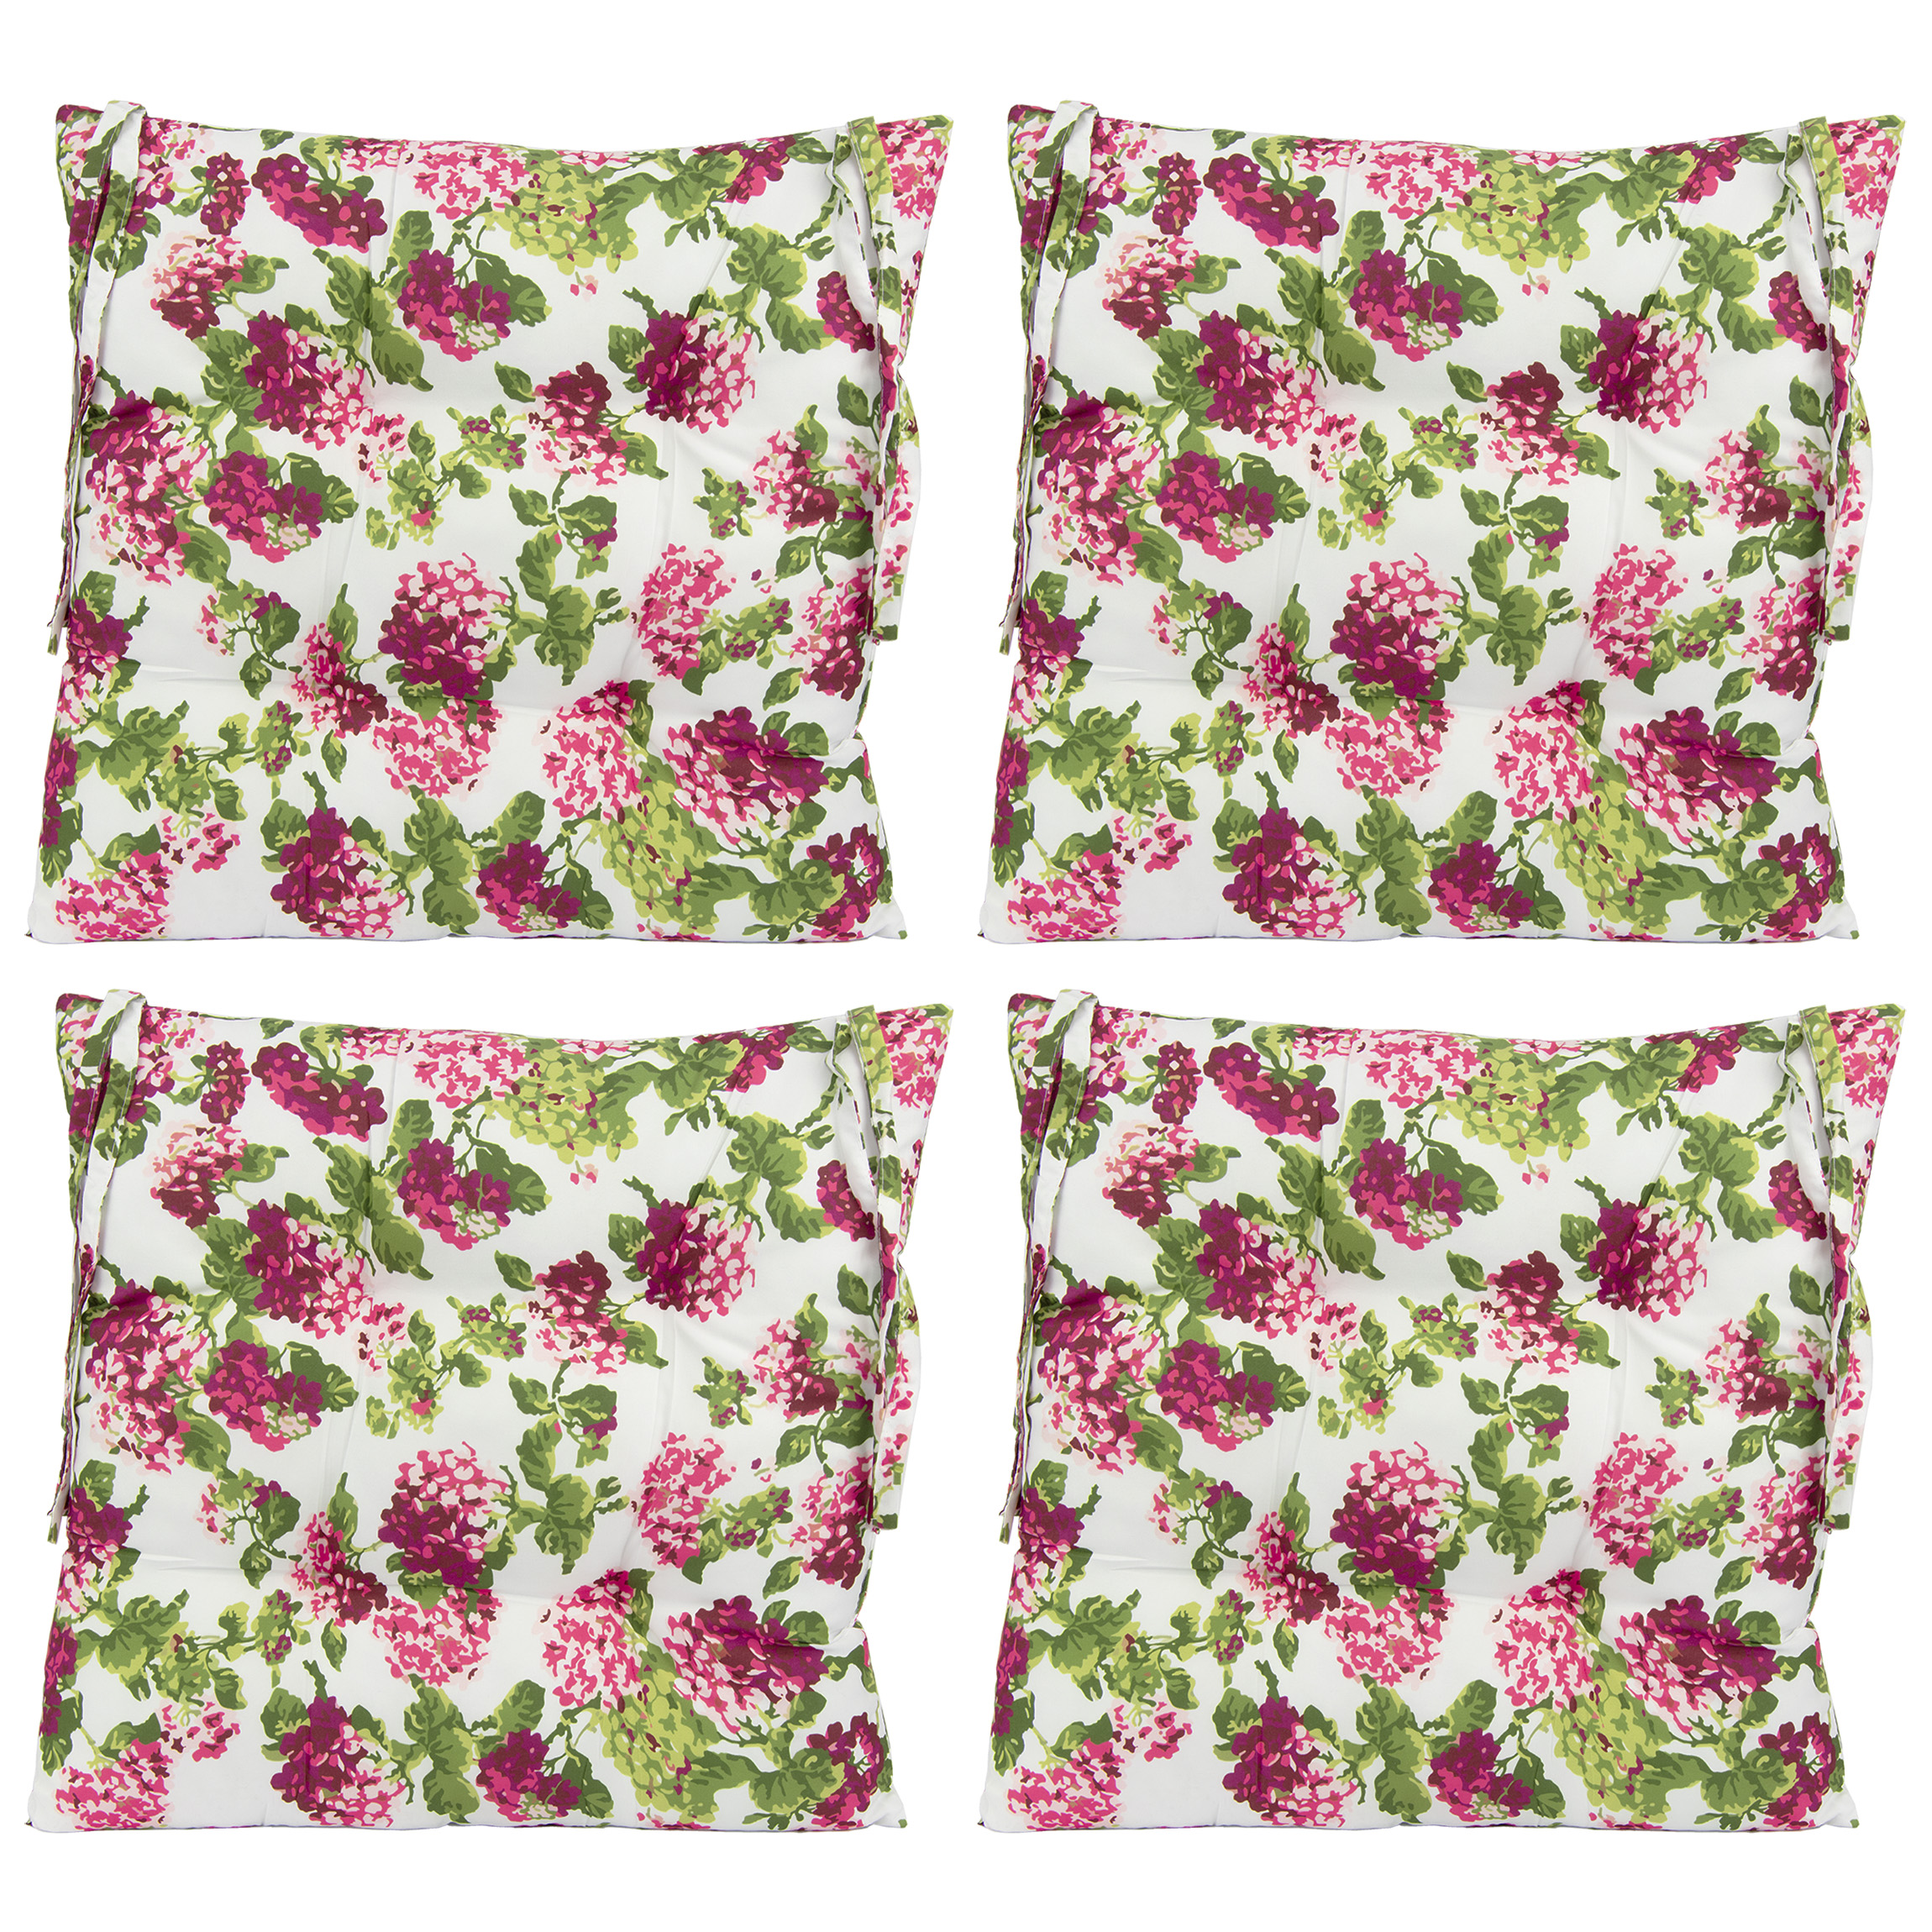 Generic Shabby Chic Pink Hydrangea Floral Chair Cushions in White/Pink/Green, 4 Pack